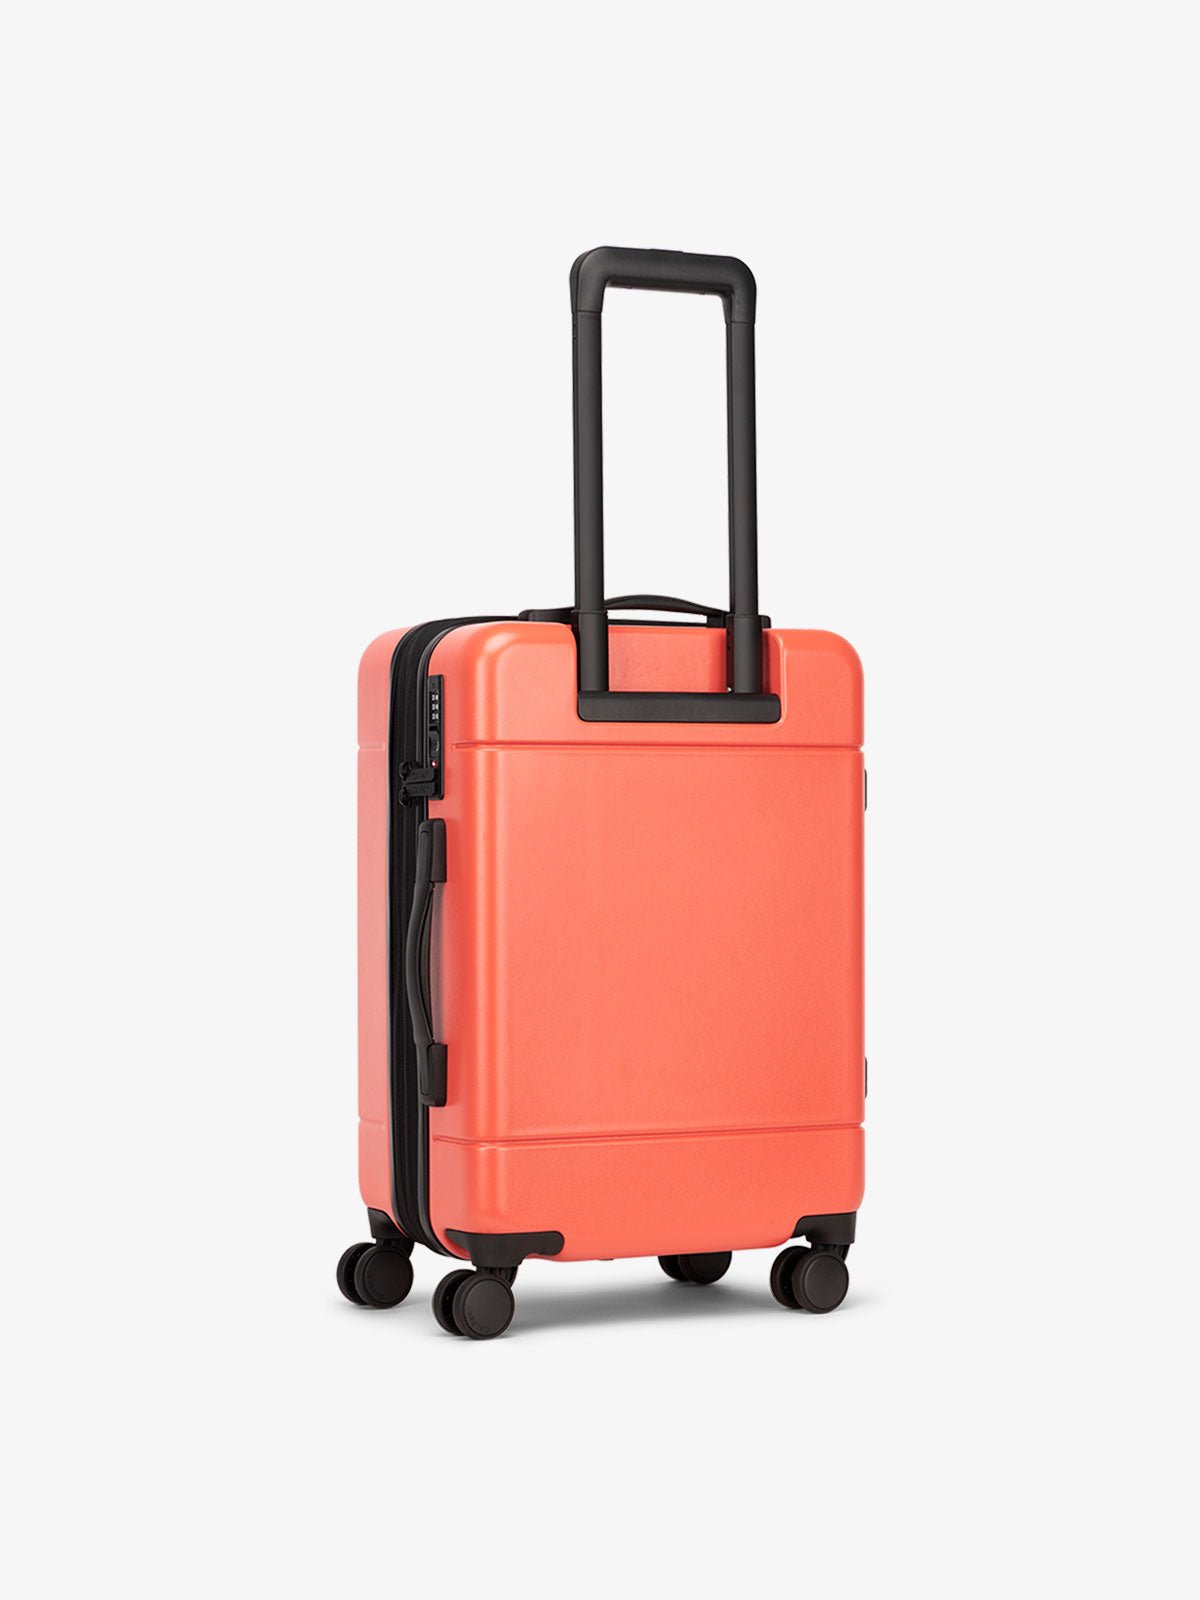 Hue rolling carry-on polycarbonate suitcase